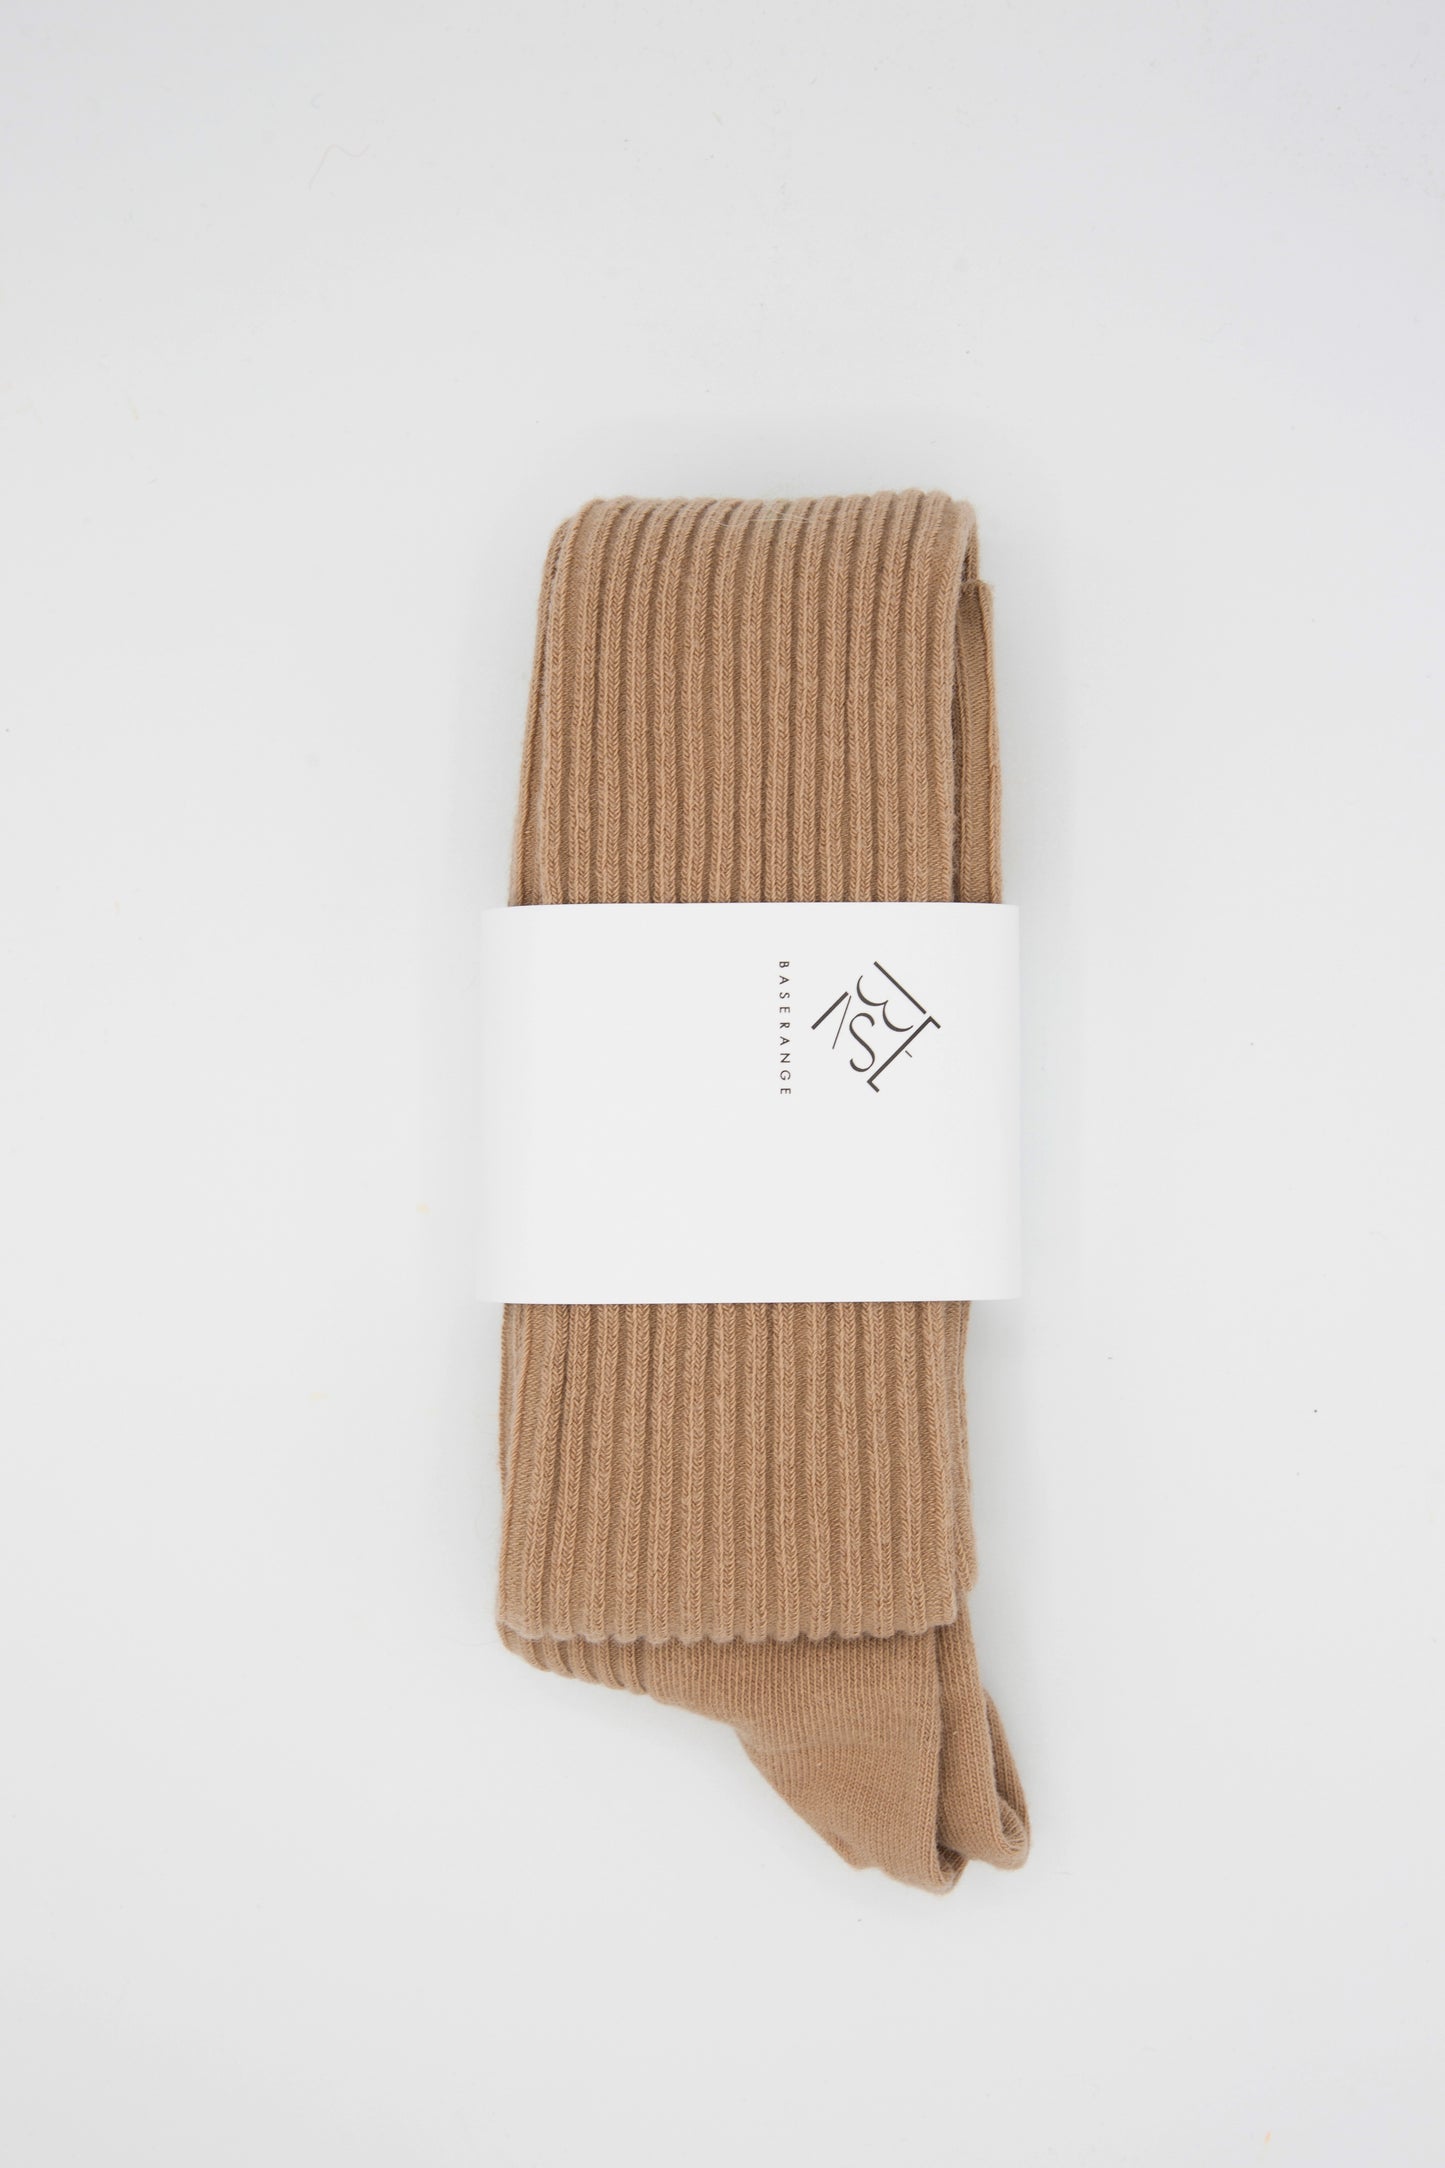 A sustainably produced pair of ribbed over-knee socks in camel, made from an organic cotton blend by Baserange.